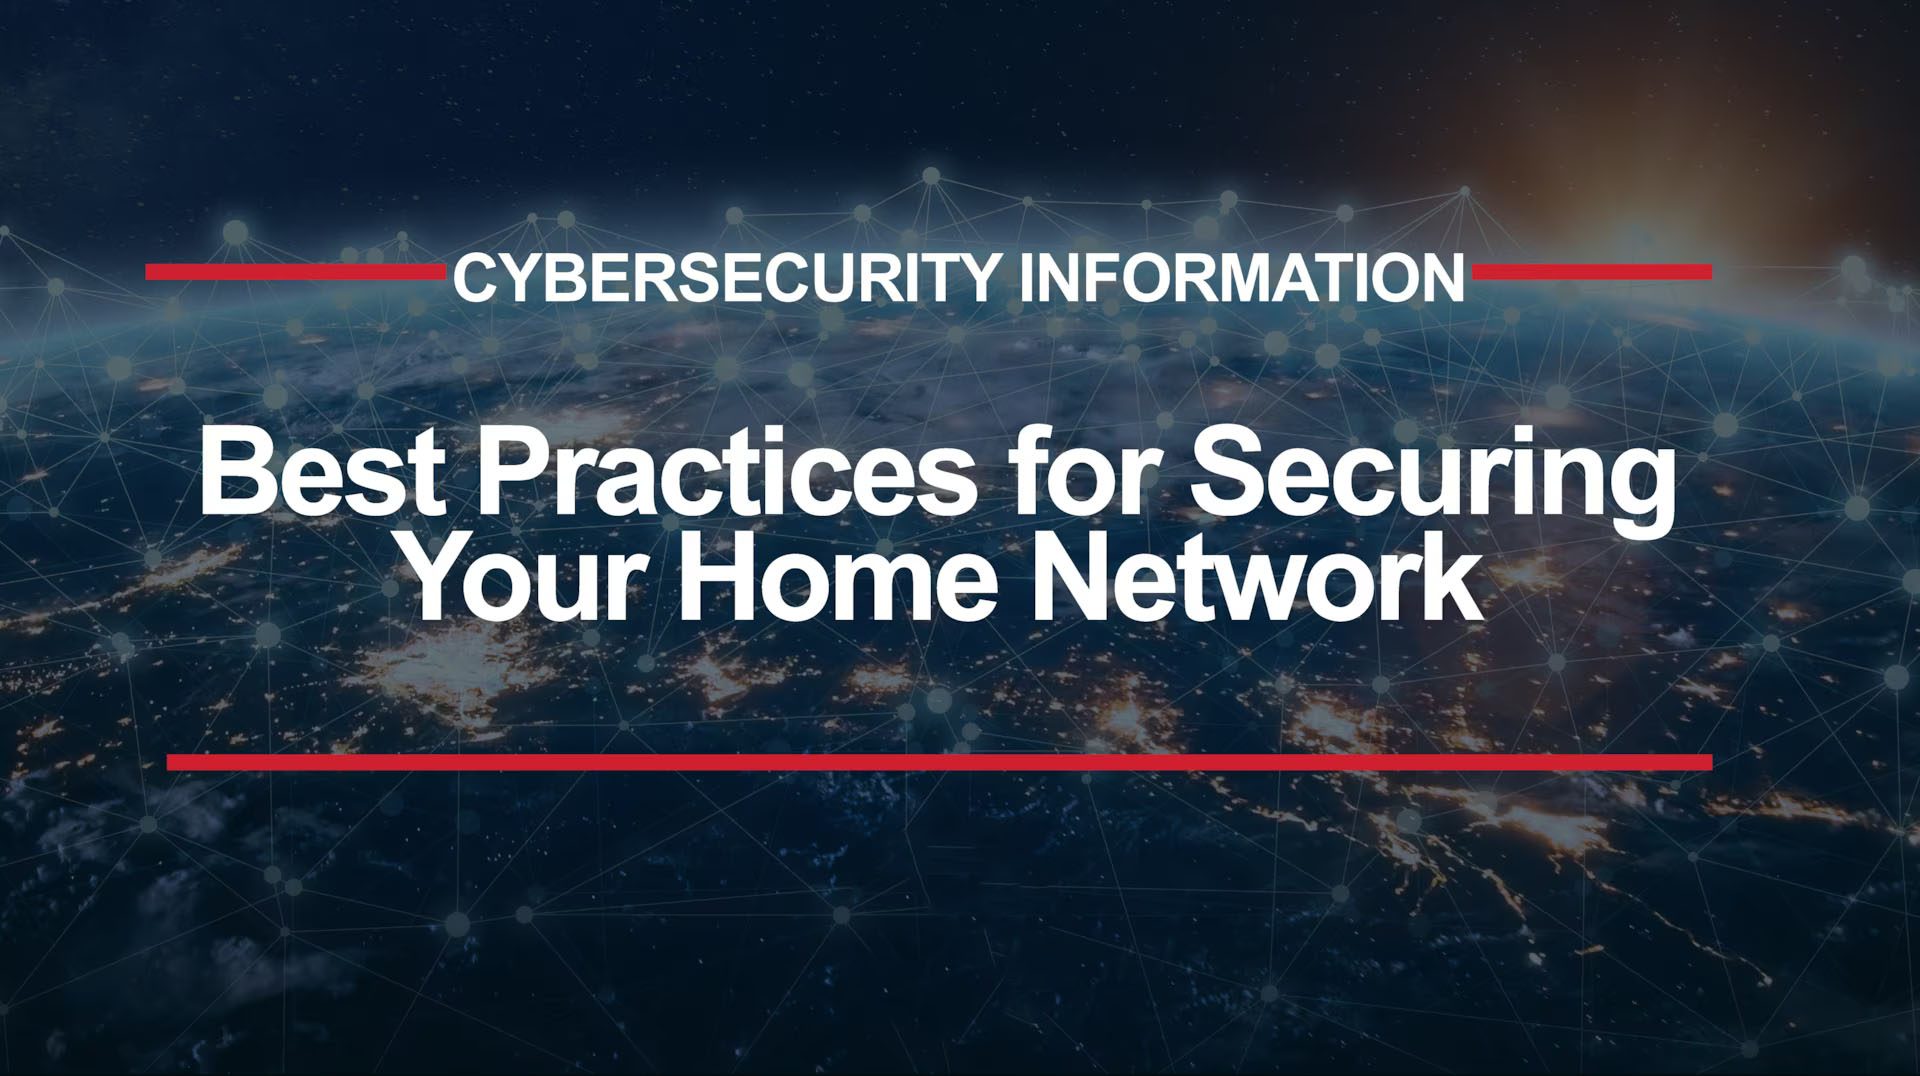 Best Practices for Cybersecurity in Networking